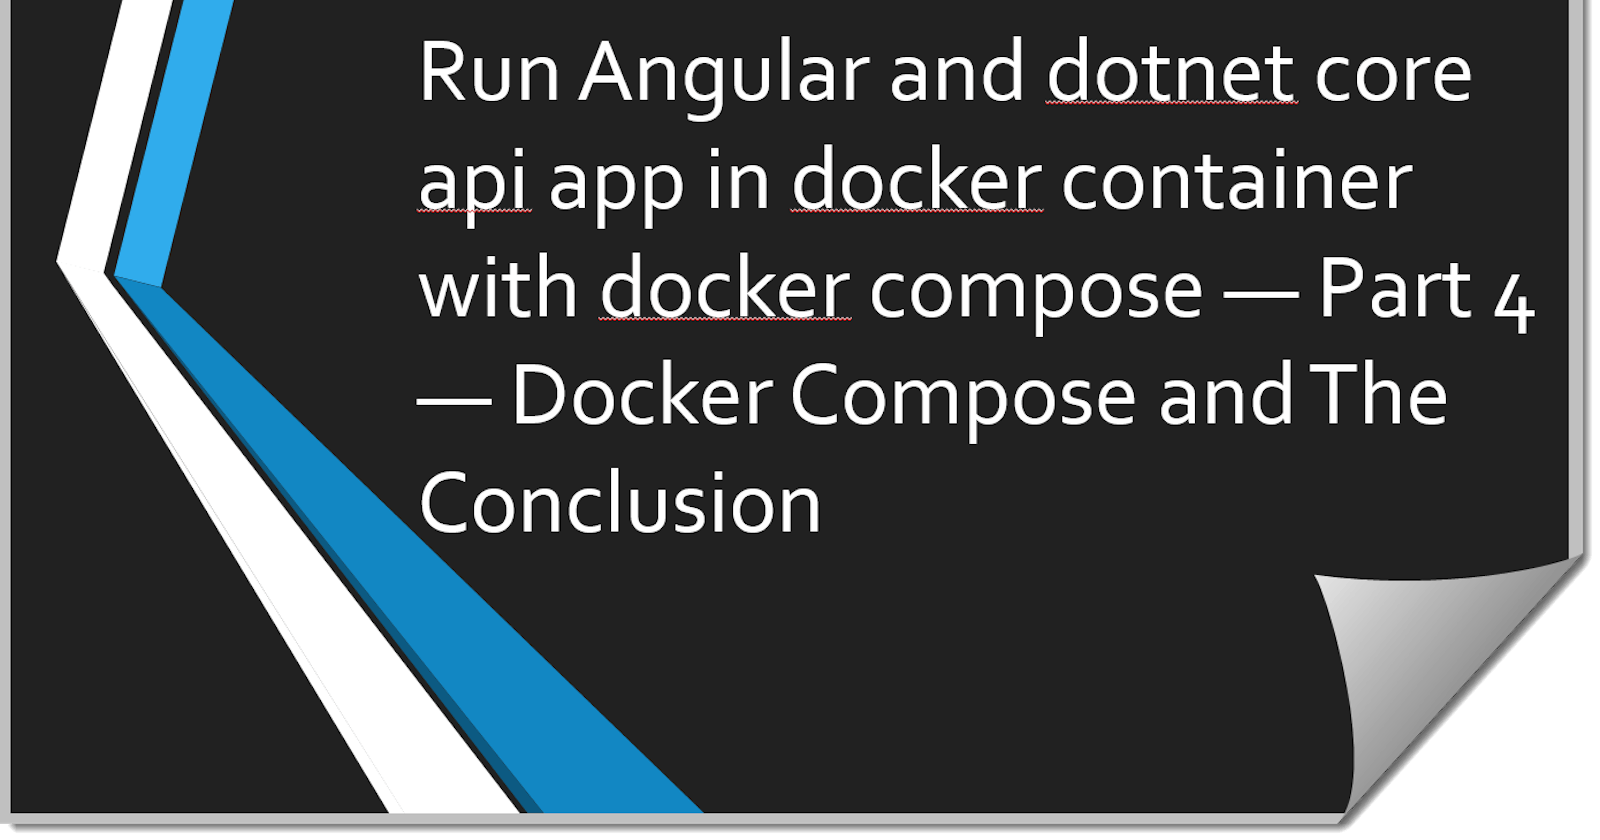 Run Angular and dotnet core api app in docker container with docker compose — Part 4 — Docker Compose and The Conclusion